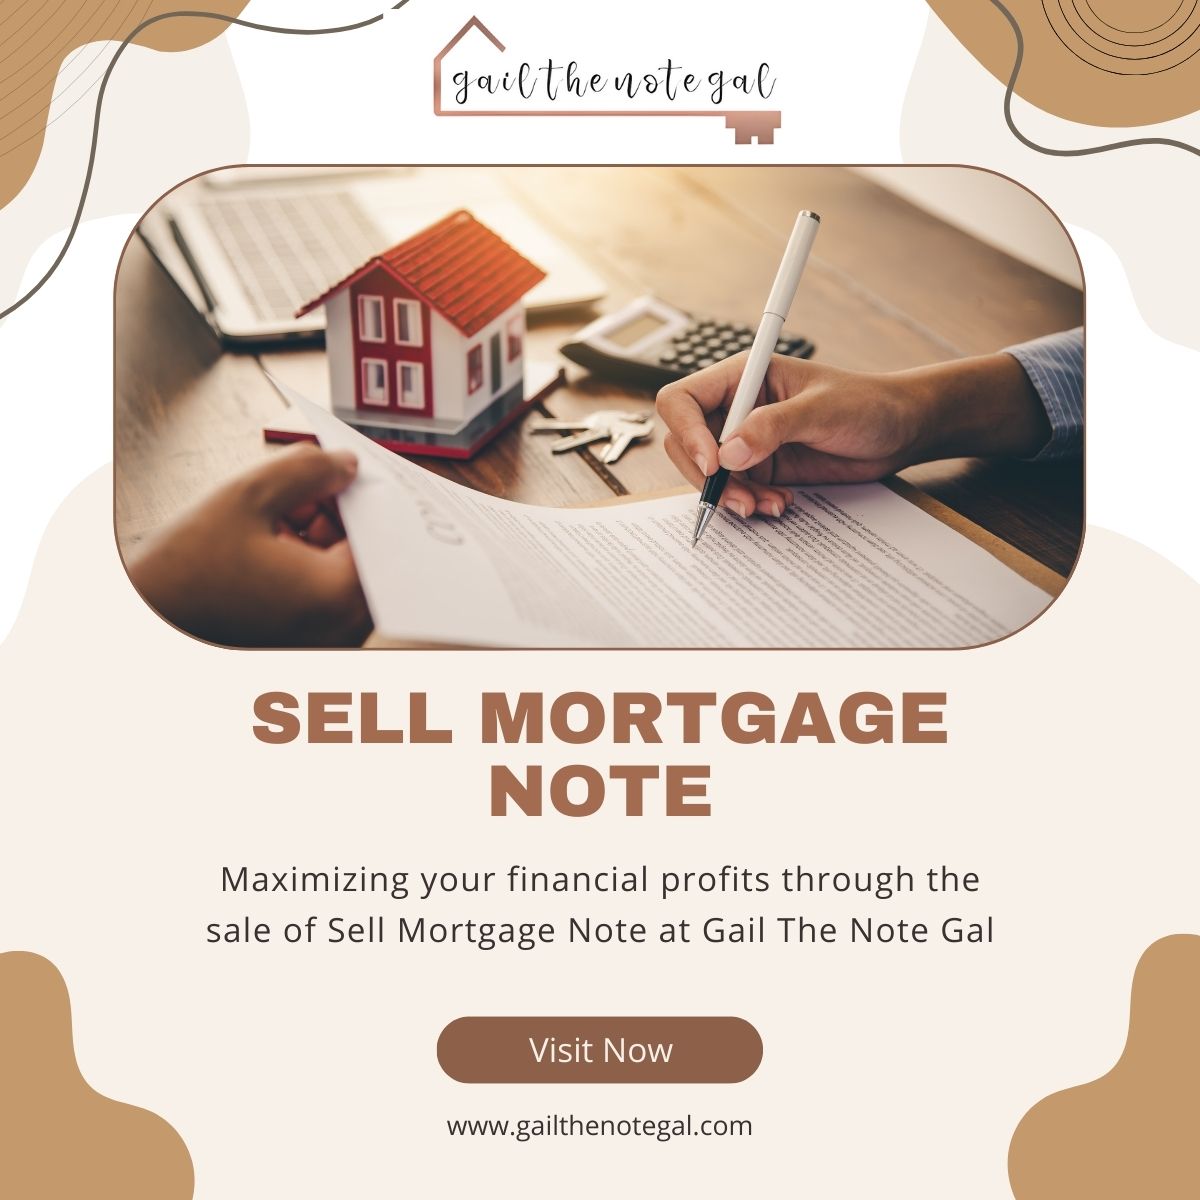 Sell mortgage note